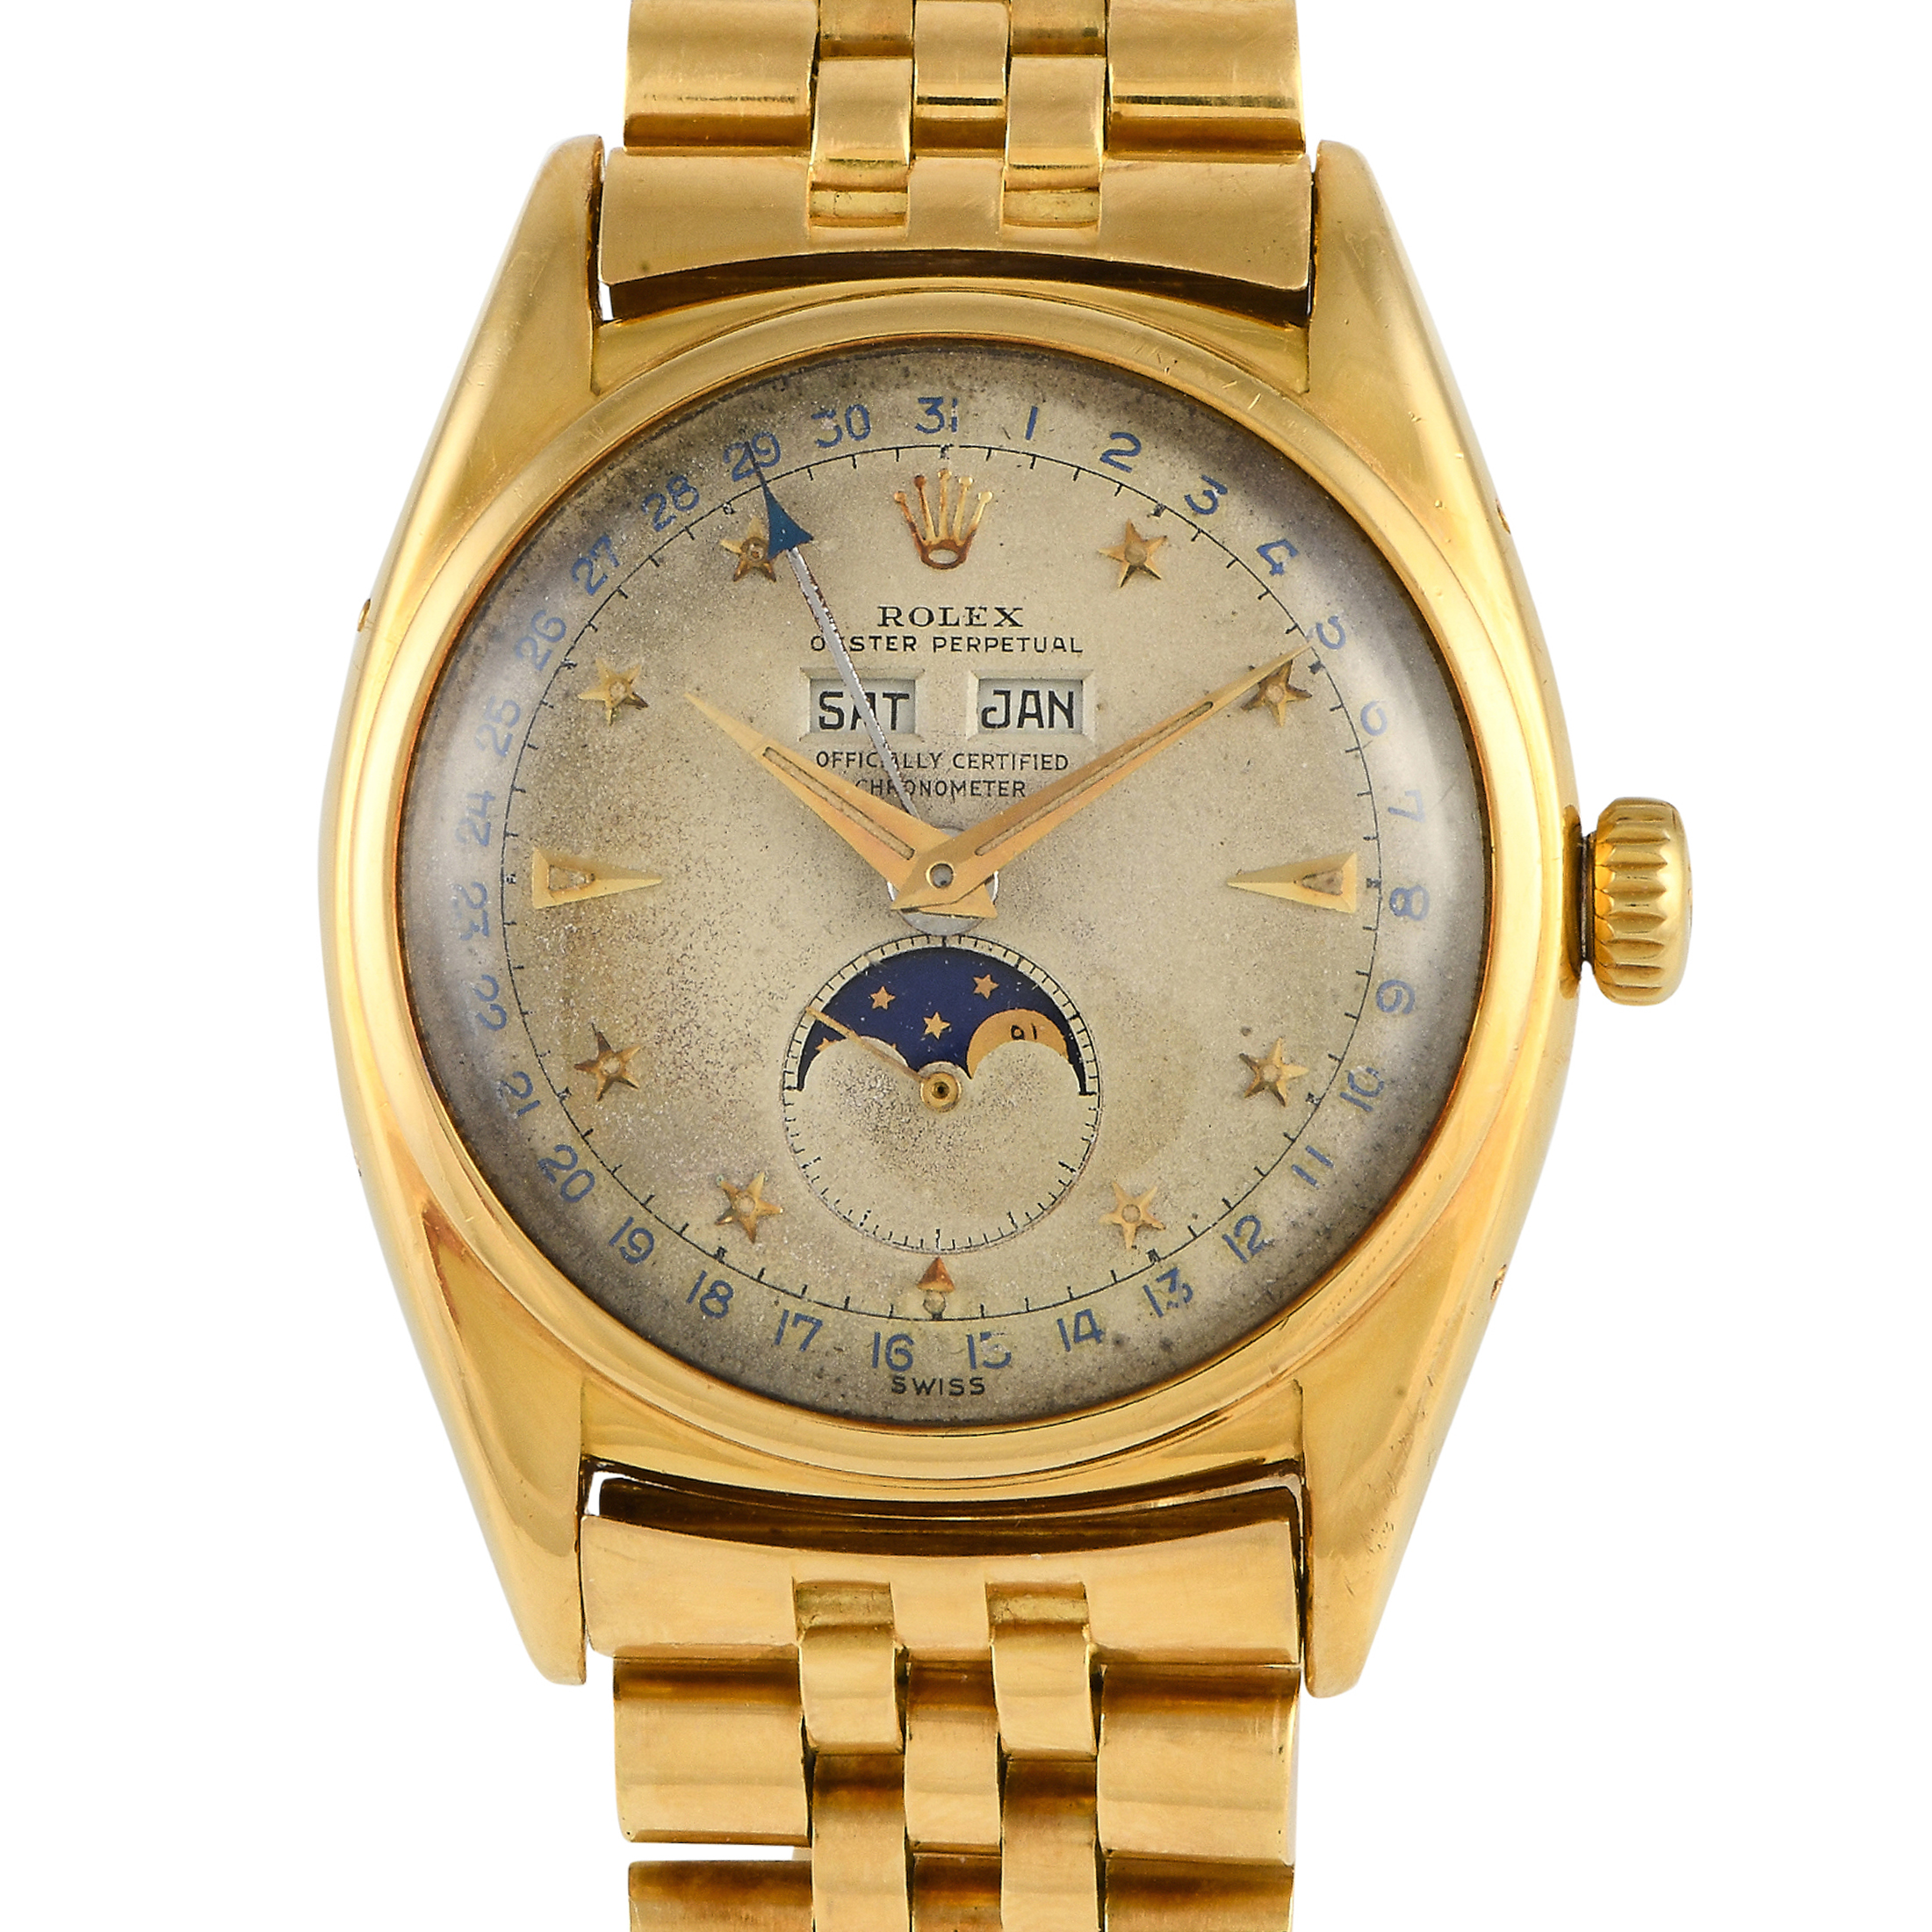 Rolex Oyster Perpetual Moonphase Stelline Yellow Gold Watch 6062